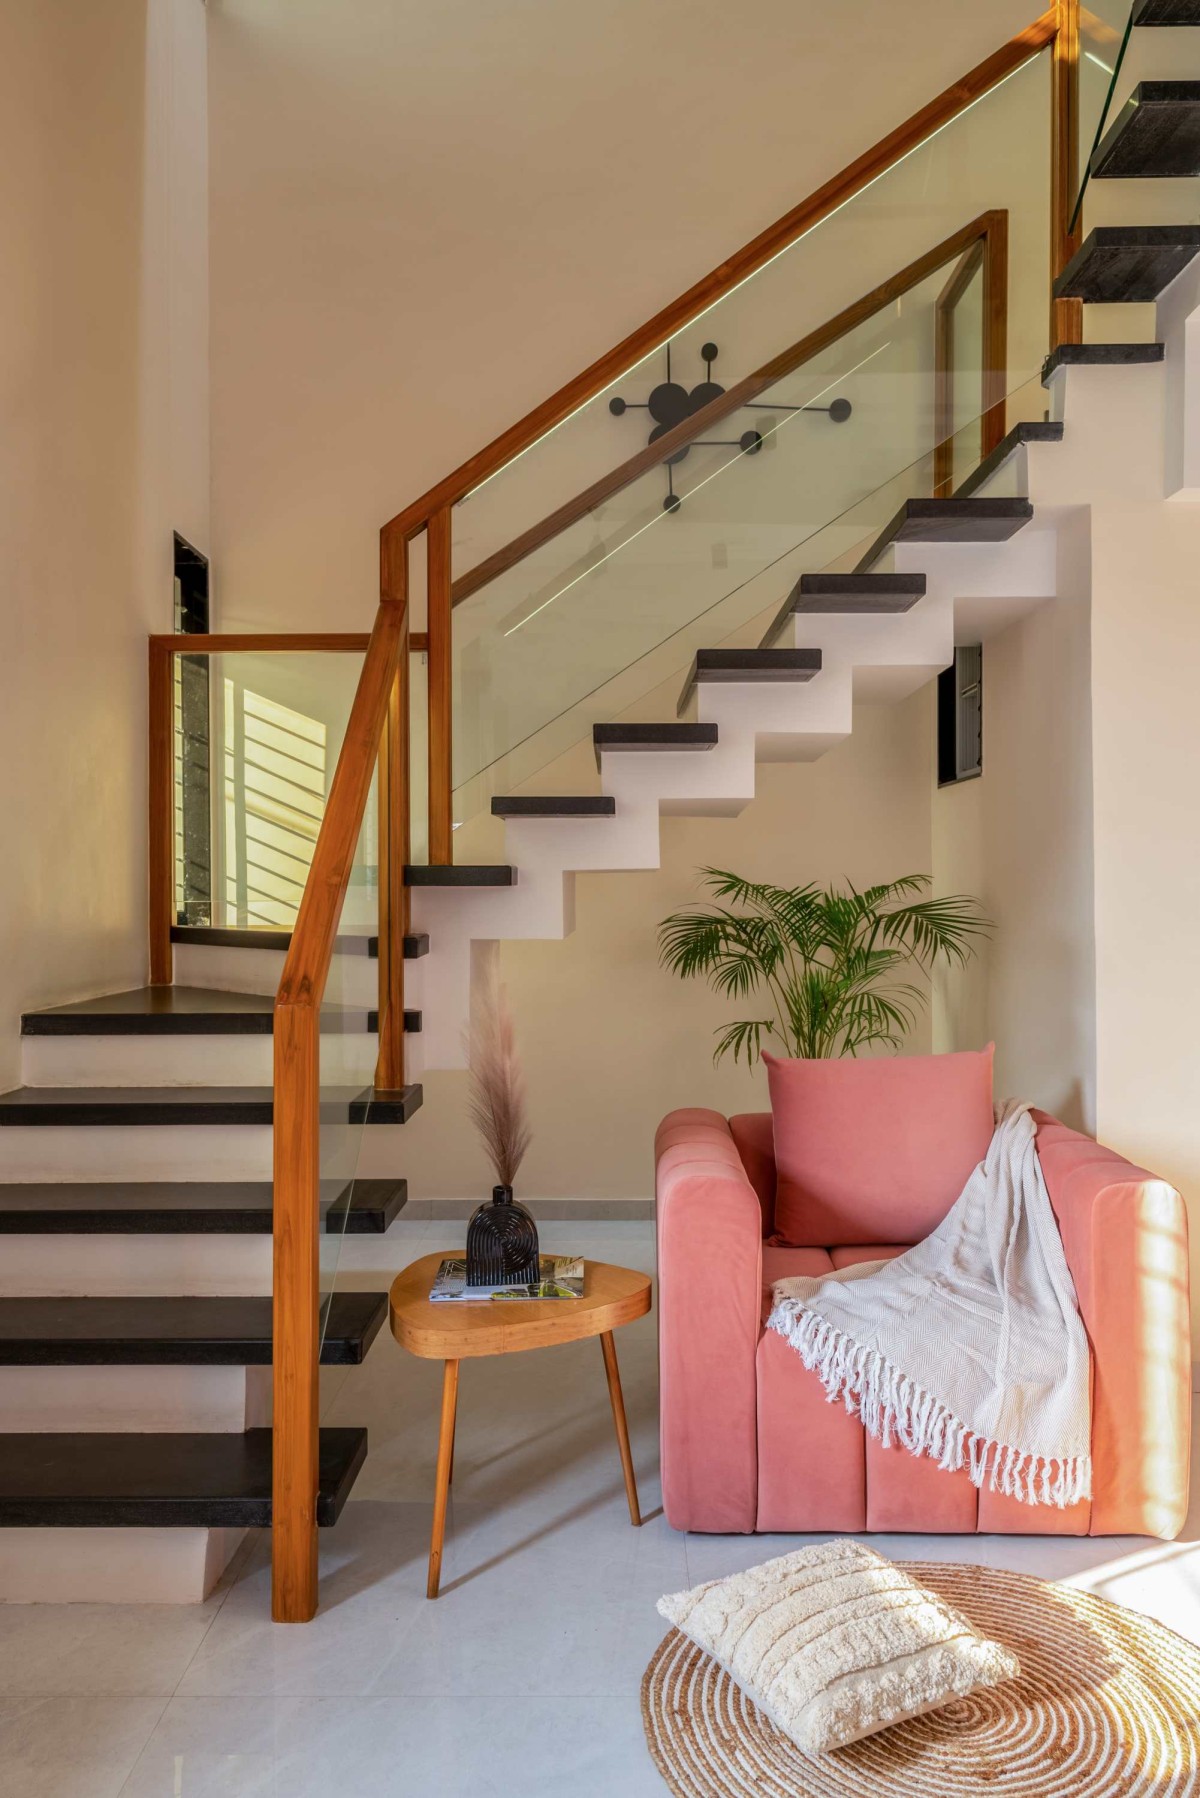 Staircase of Parekh's Residence by J Architects